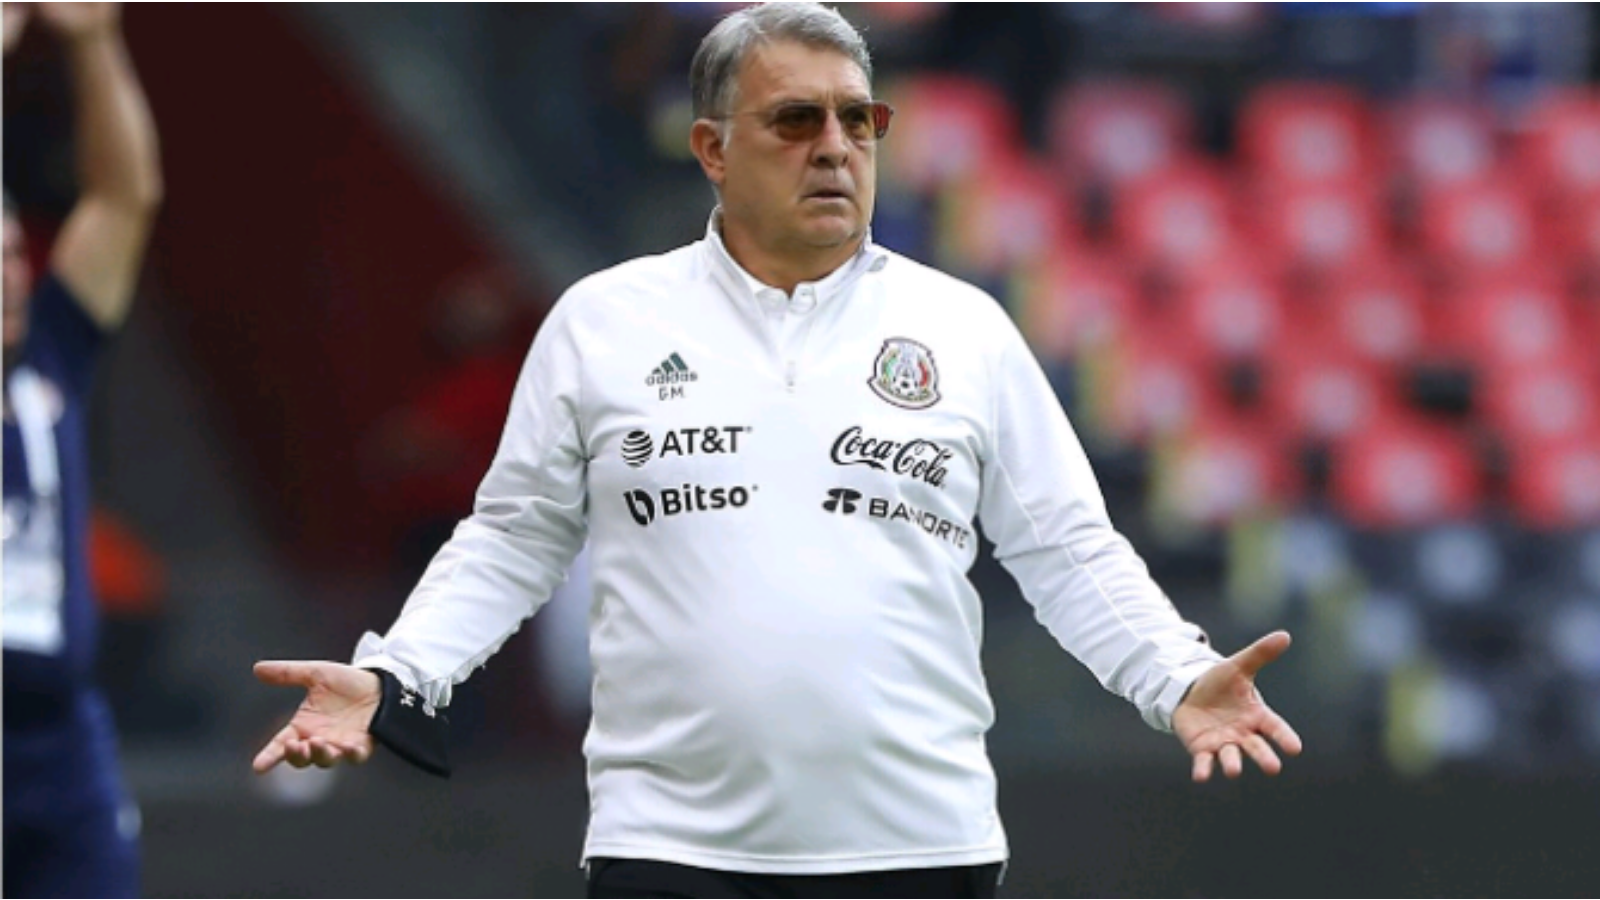 FMF has a replacement for Gerardo Martino if Mexico National Team doesn’t win against USMNT